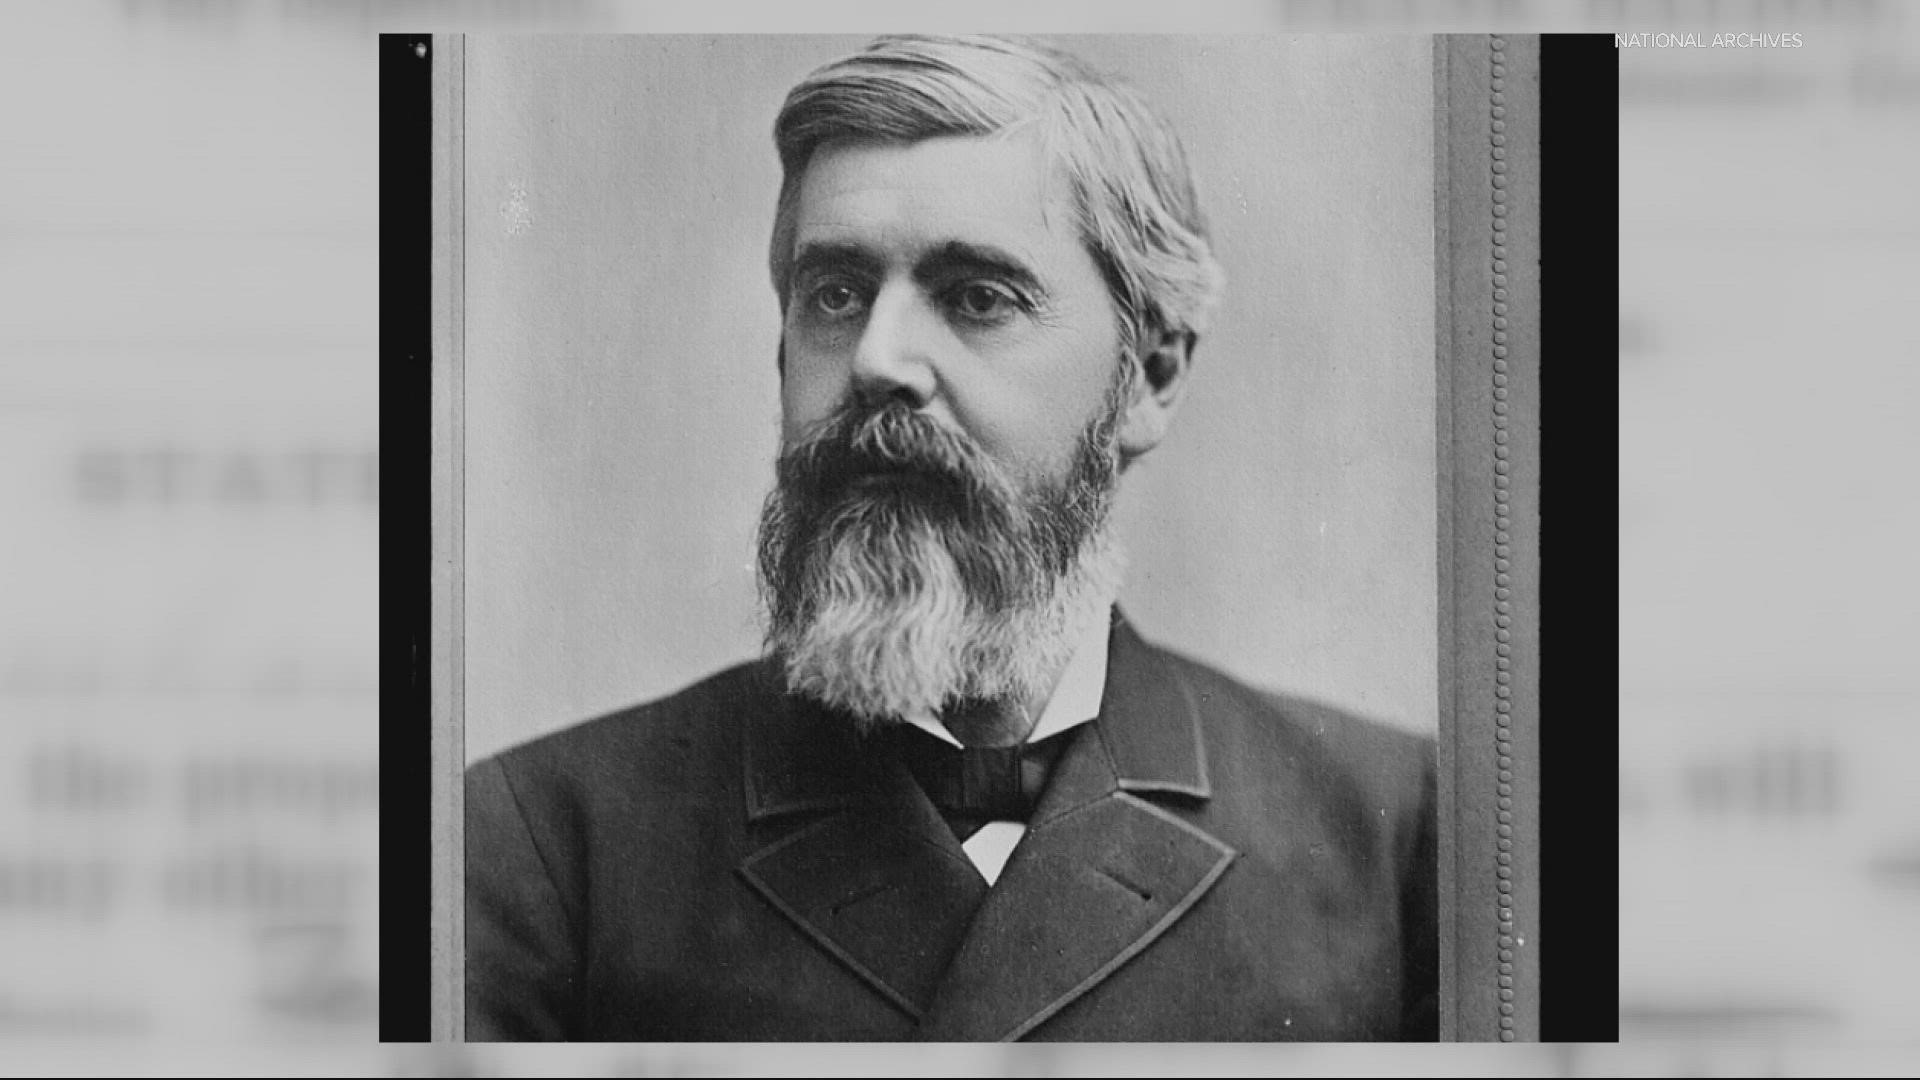 The city of Gresham is named after U.S. Postmaster General Walter Quinton Gresham. KGW Sunrise's Devon Haskins explains why the city was named after him.